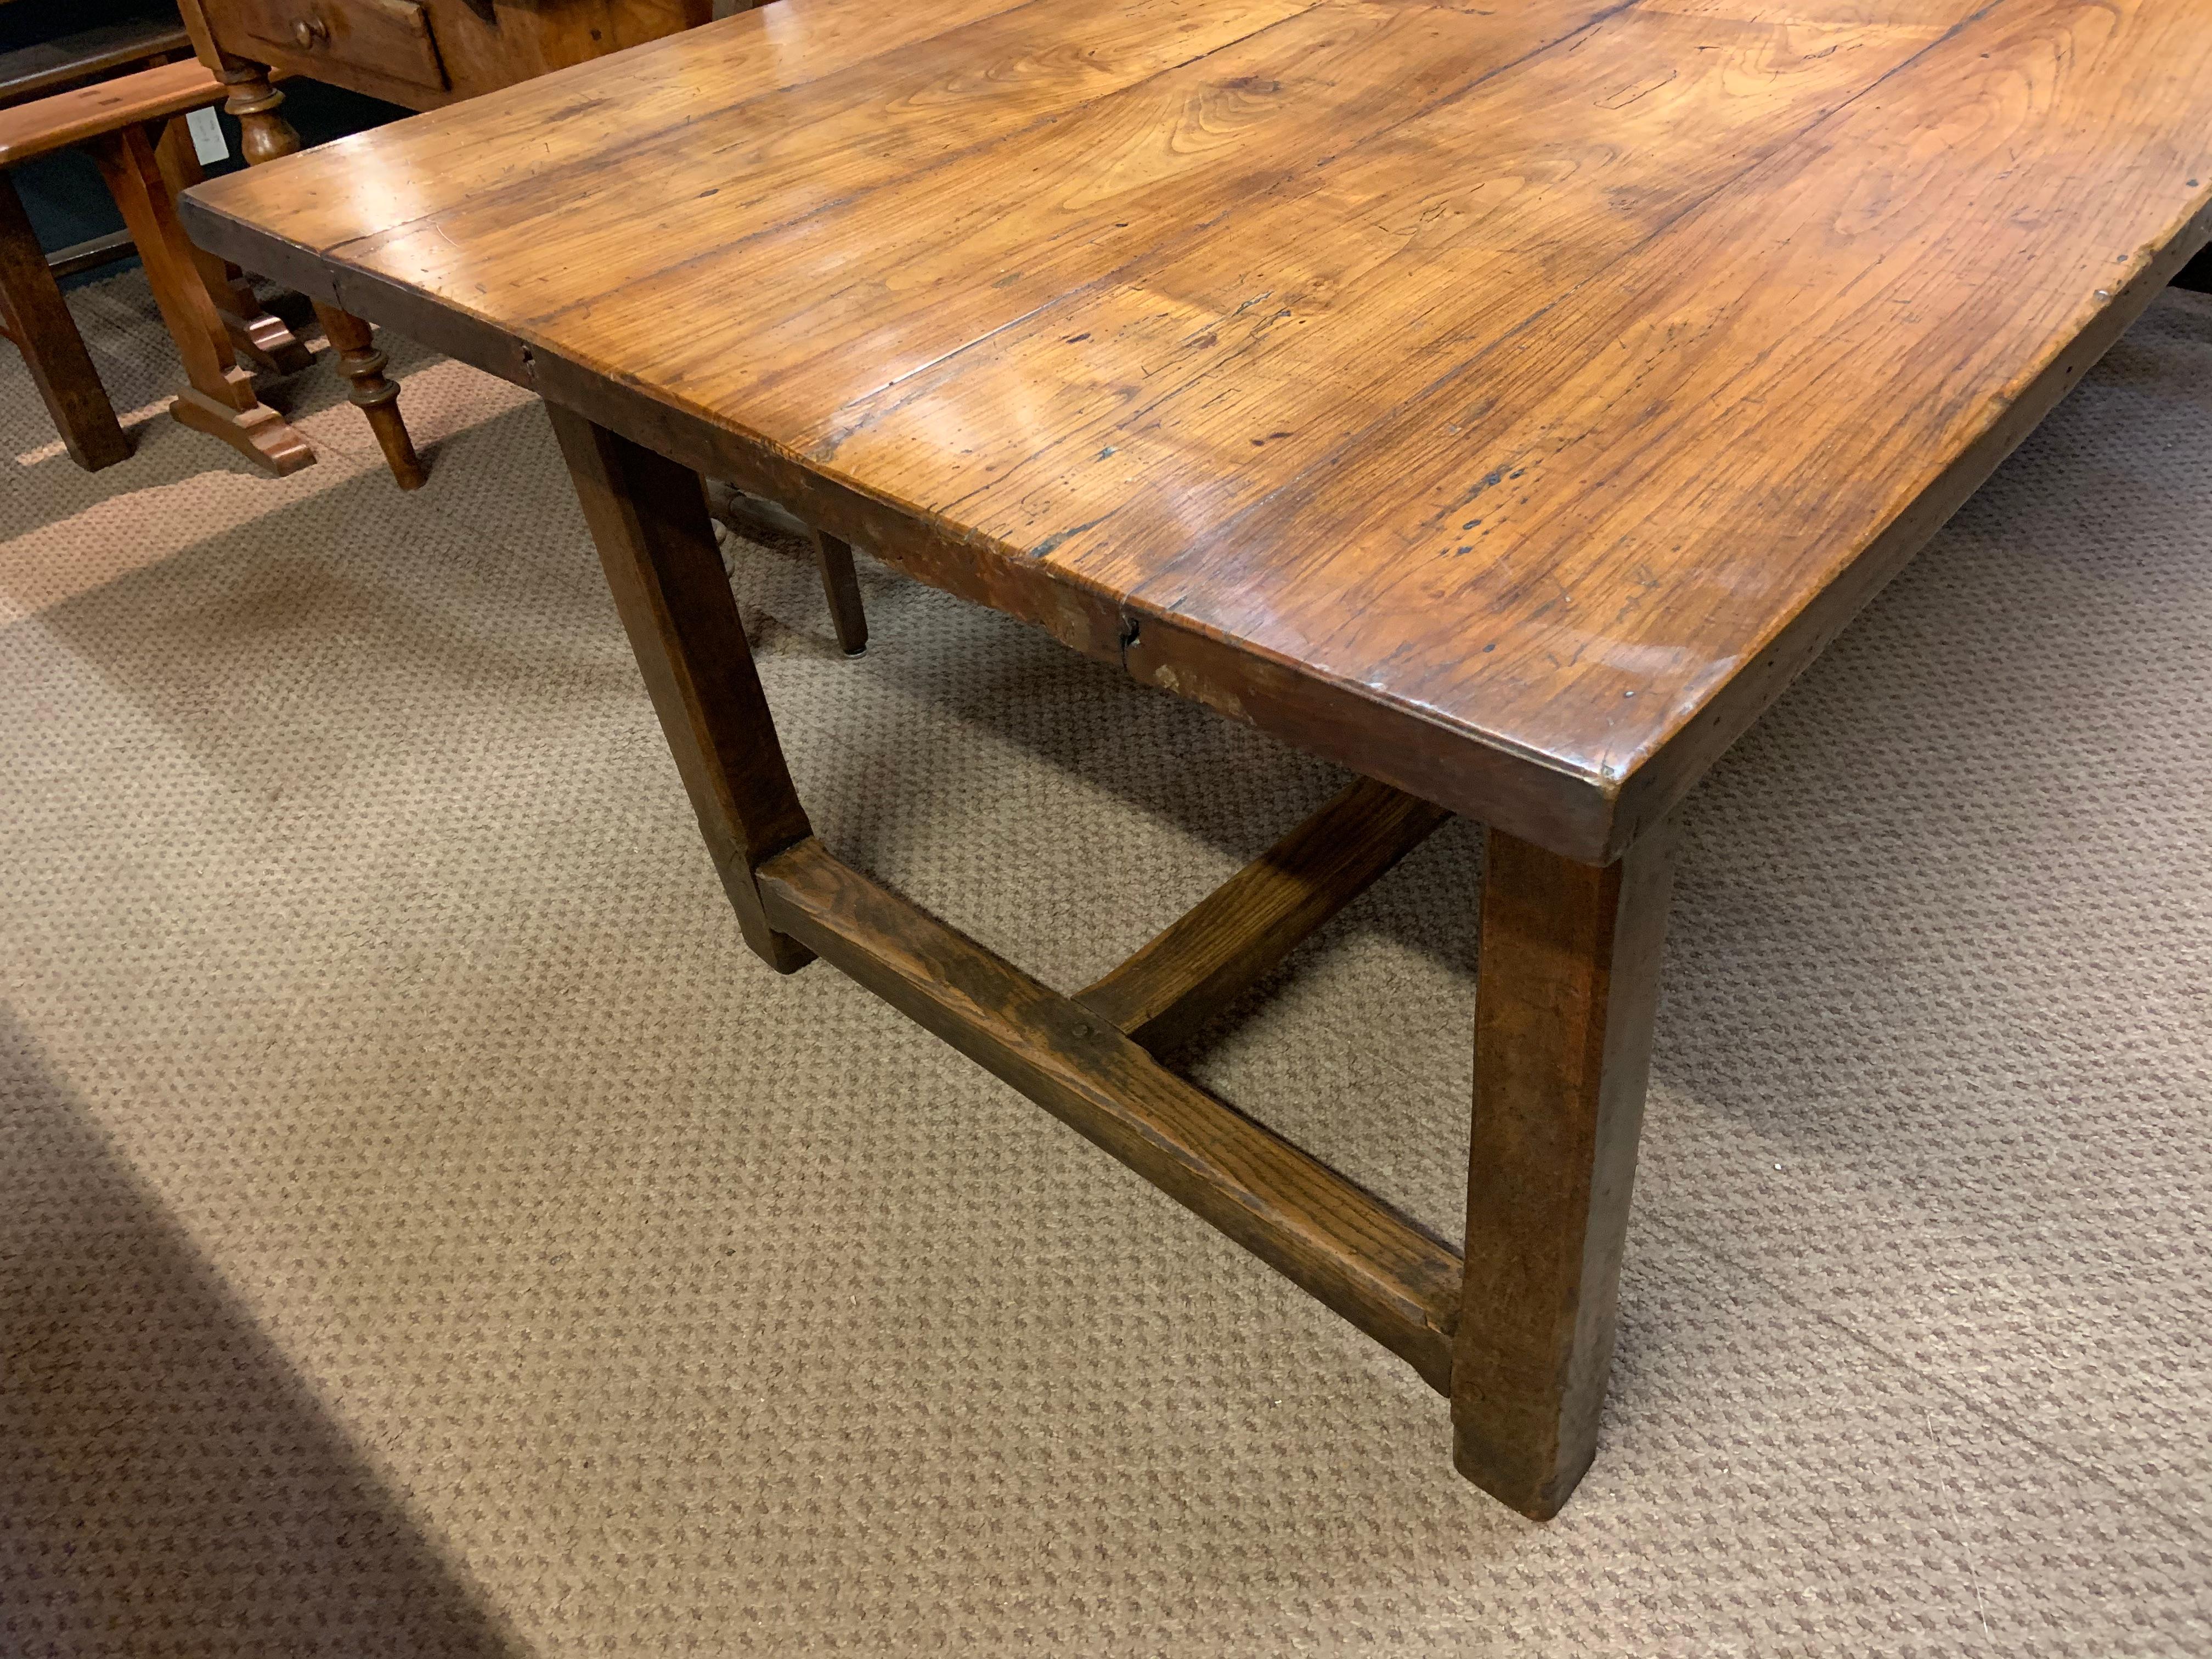 19th century cherry farmhouse table with H stretcher. Gorgeous thick wide top farmhouse table. Lovely base with wonderful patination and colour.